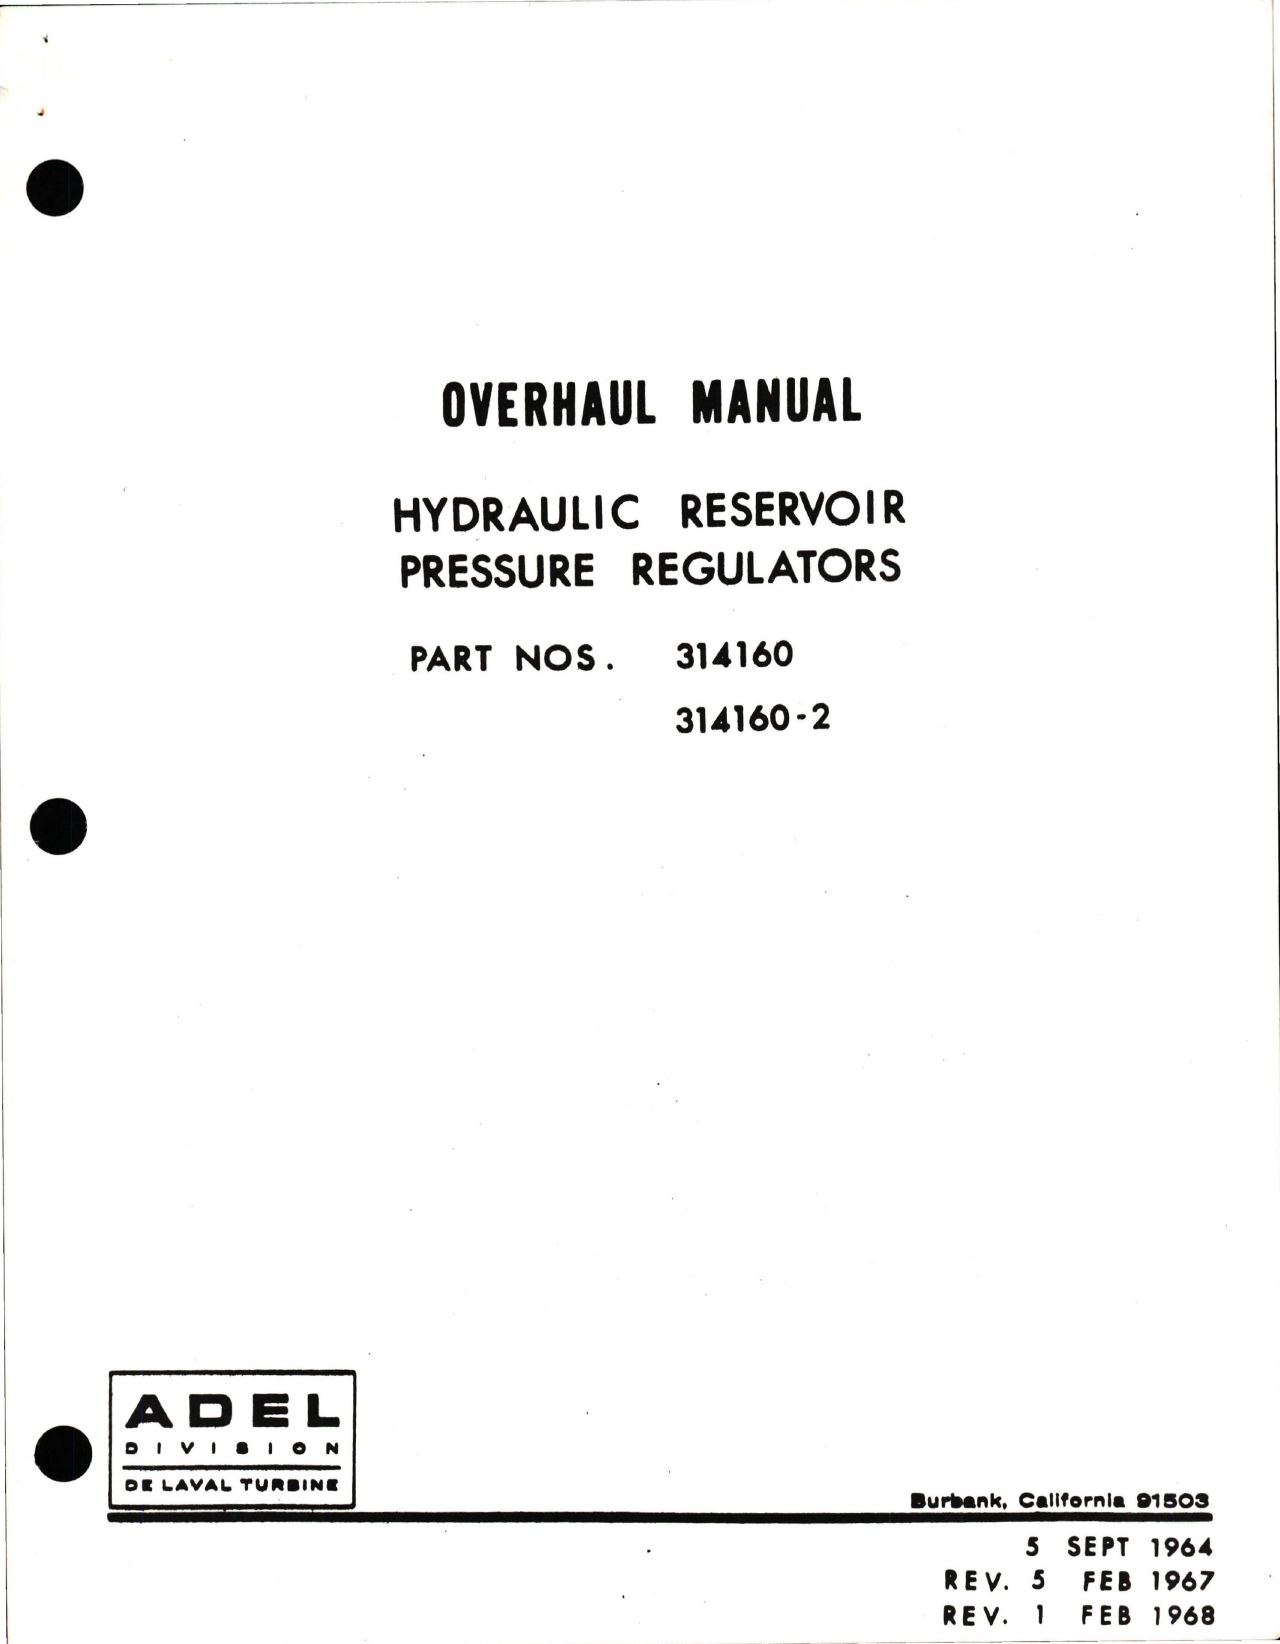 Sample page 1 from AirCorps Library document: Overhaul Manual for Hydraulic Reservoir Pressure Regulators - Parts 314160 and 314160-2